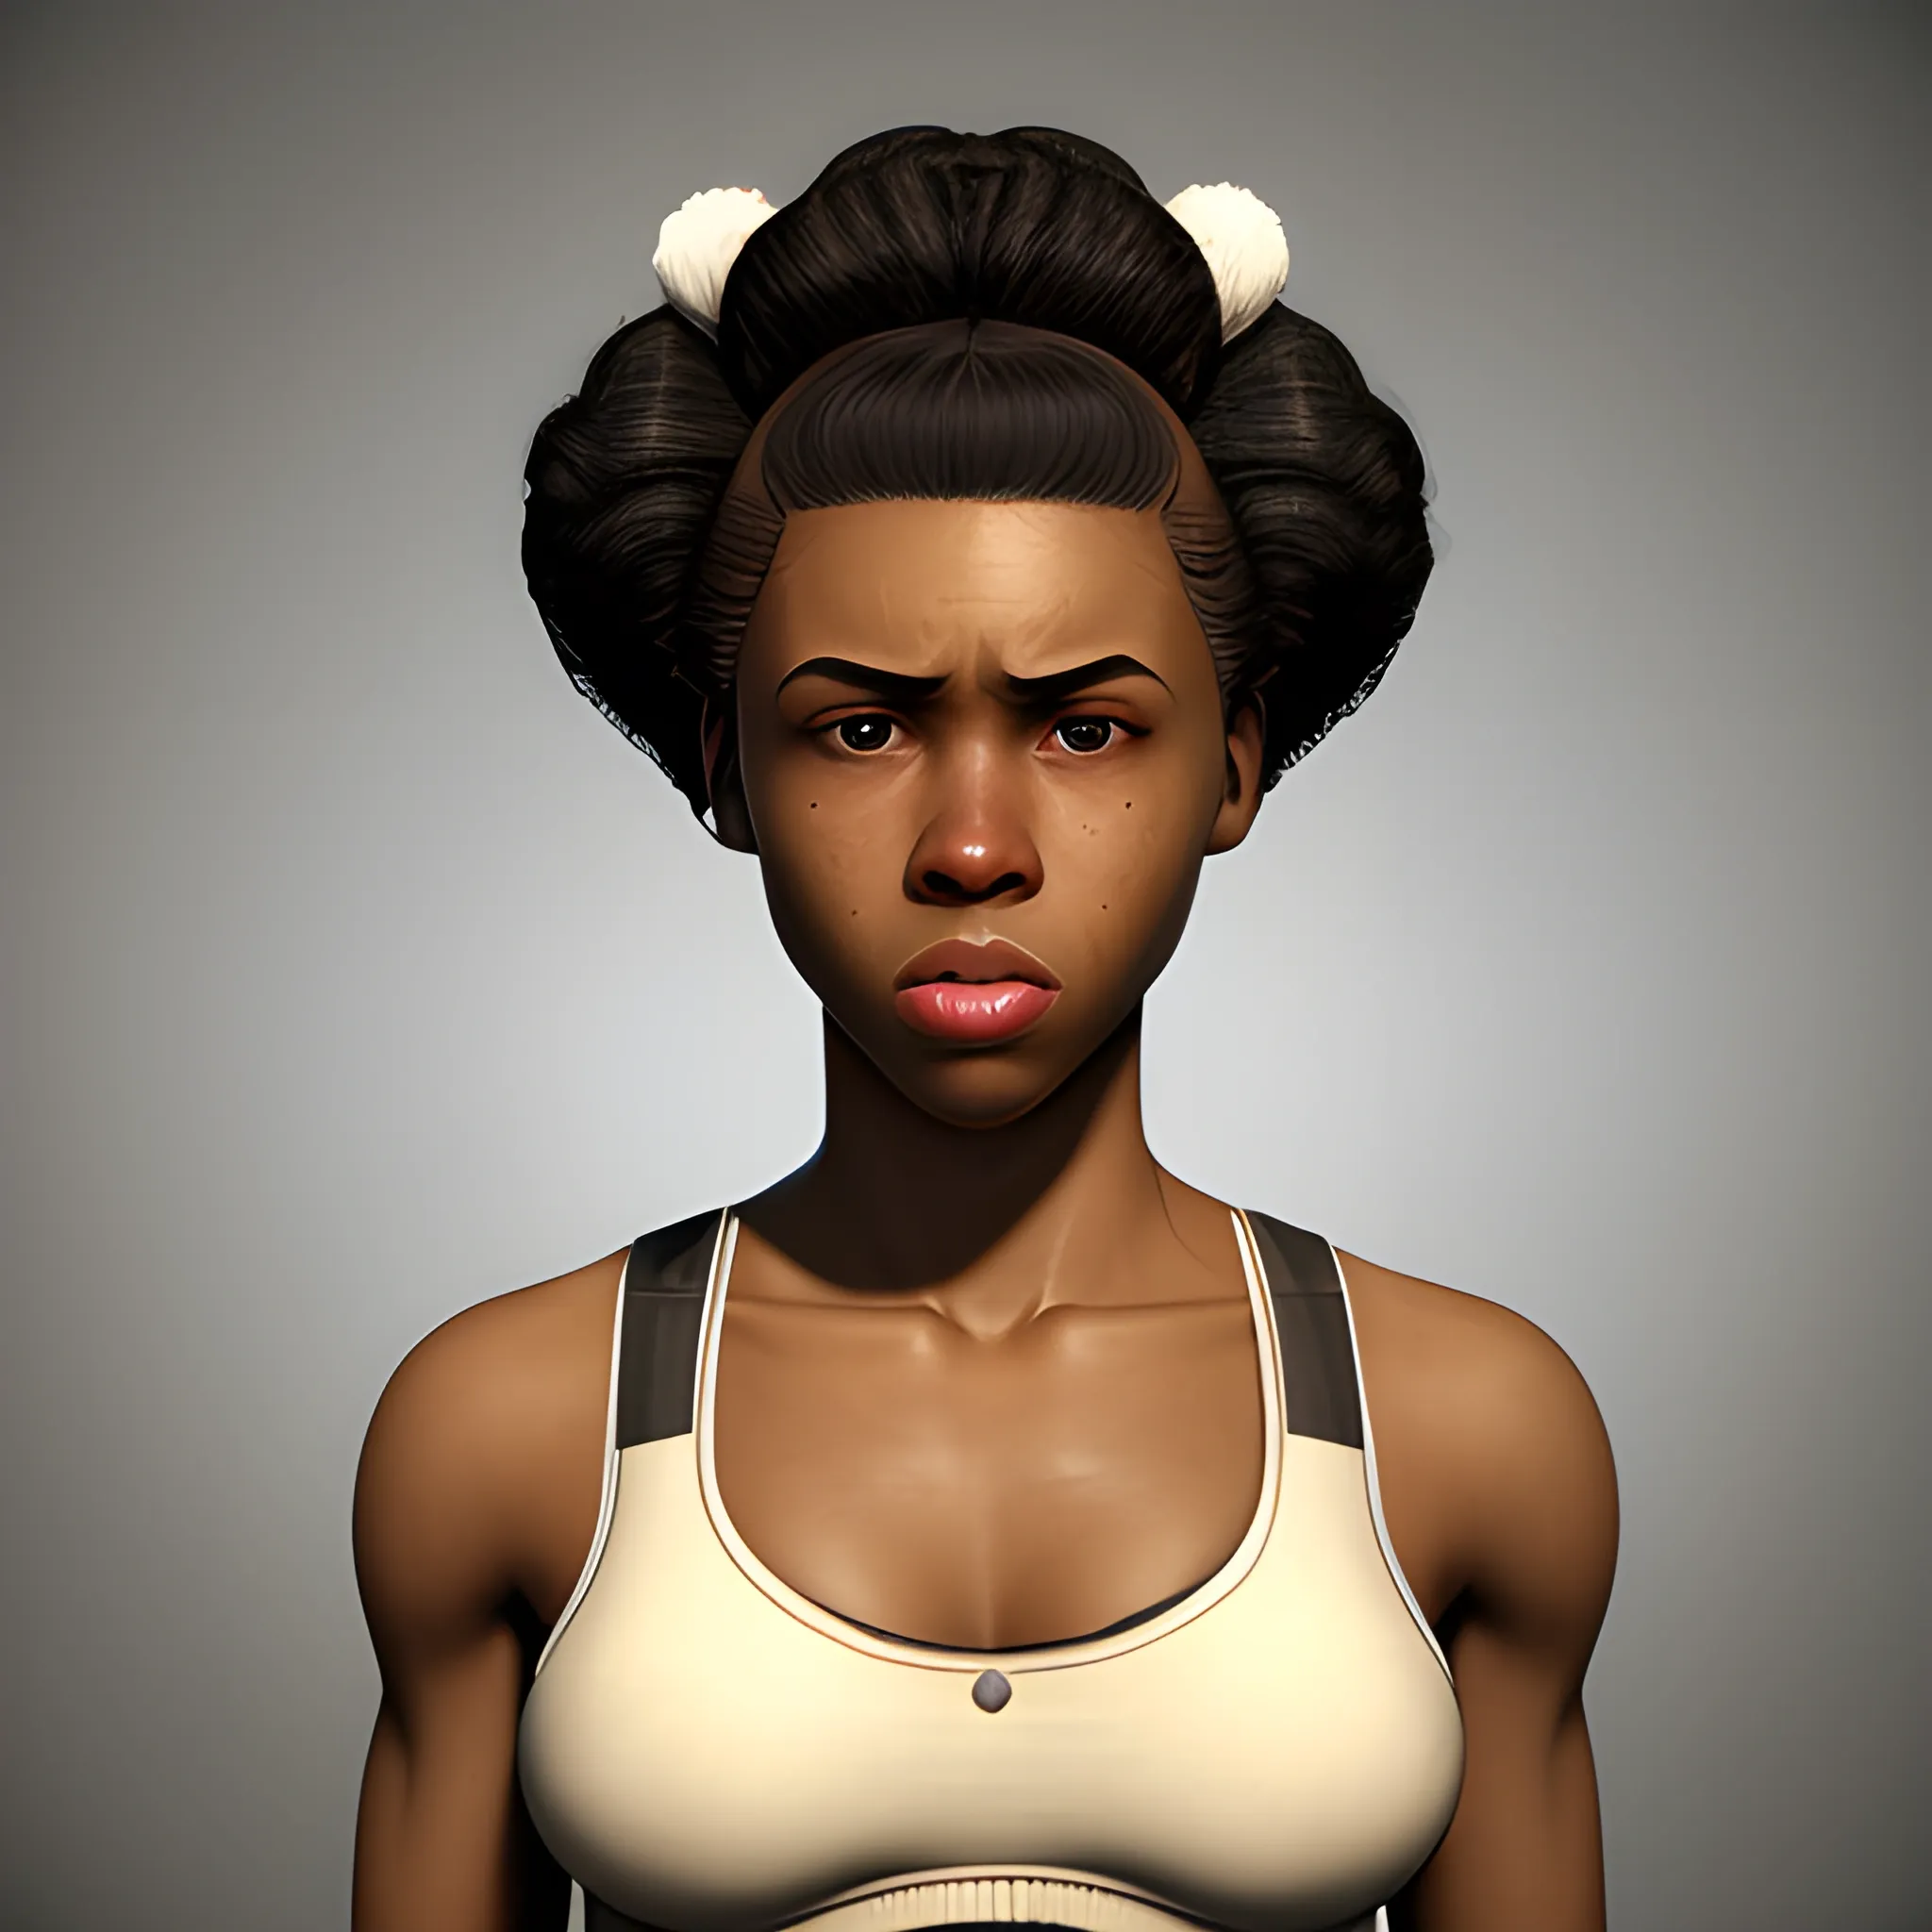 In the style of fallout 1, (masterpiece), (portrait photography), (portrait of an African-American feminine male), no makeup, flat chested, white sports bra, bun hairstyle, black curly hair, black hair, brown eyes, sloped shoulders, skinny body, lithe body, full lips, round button nose